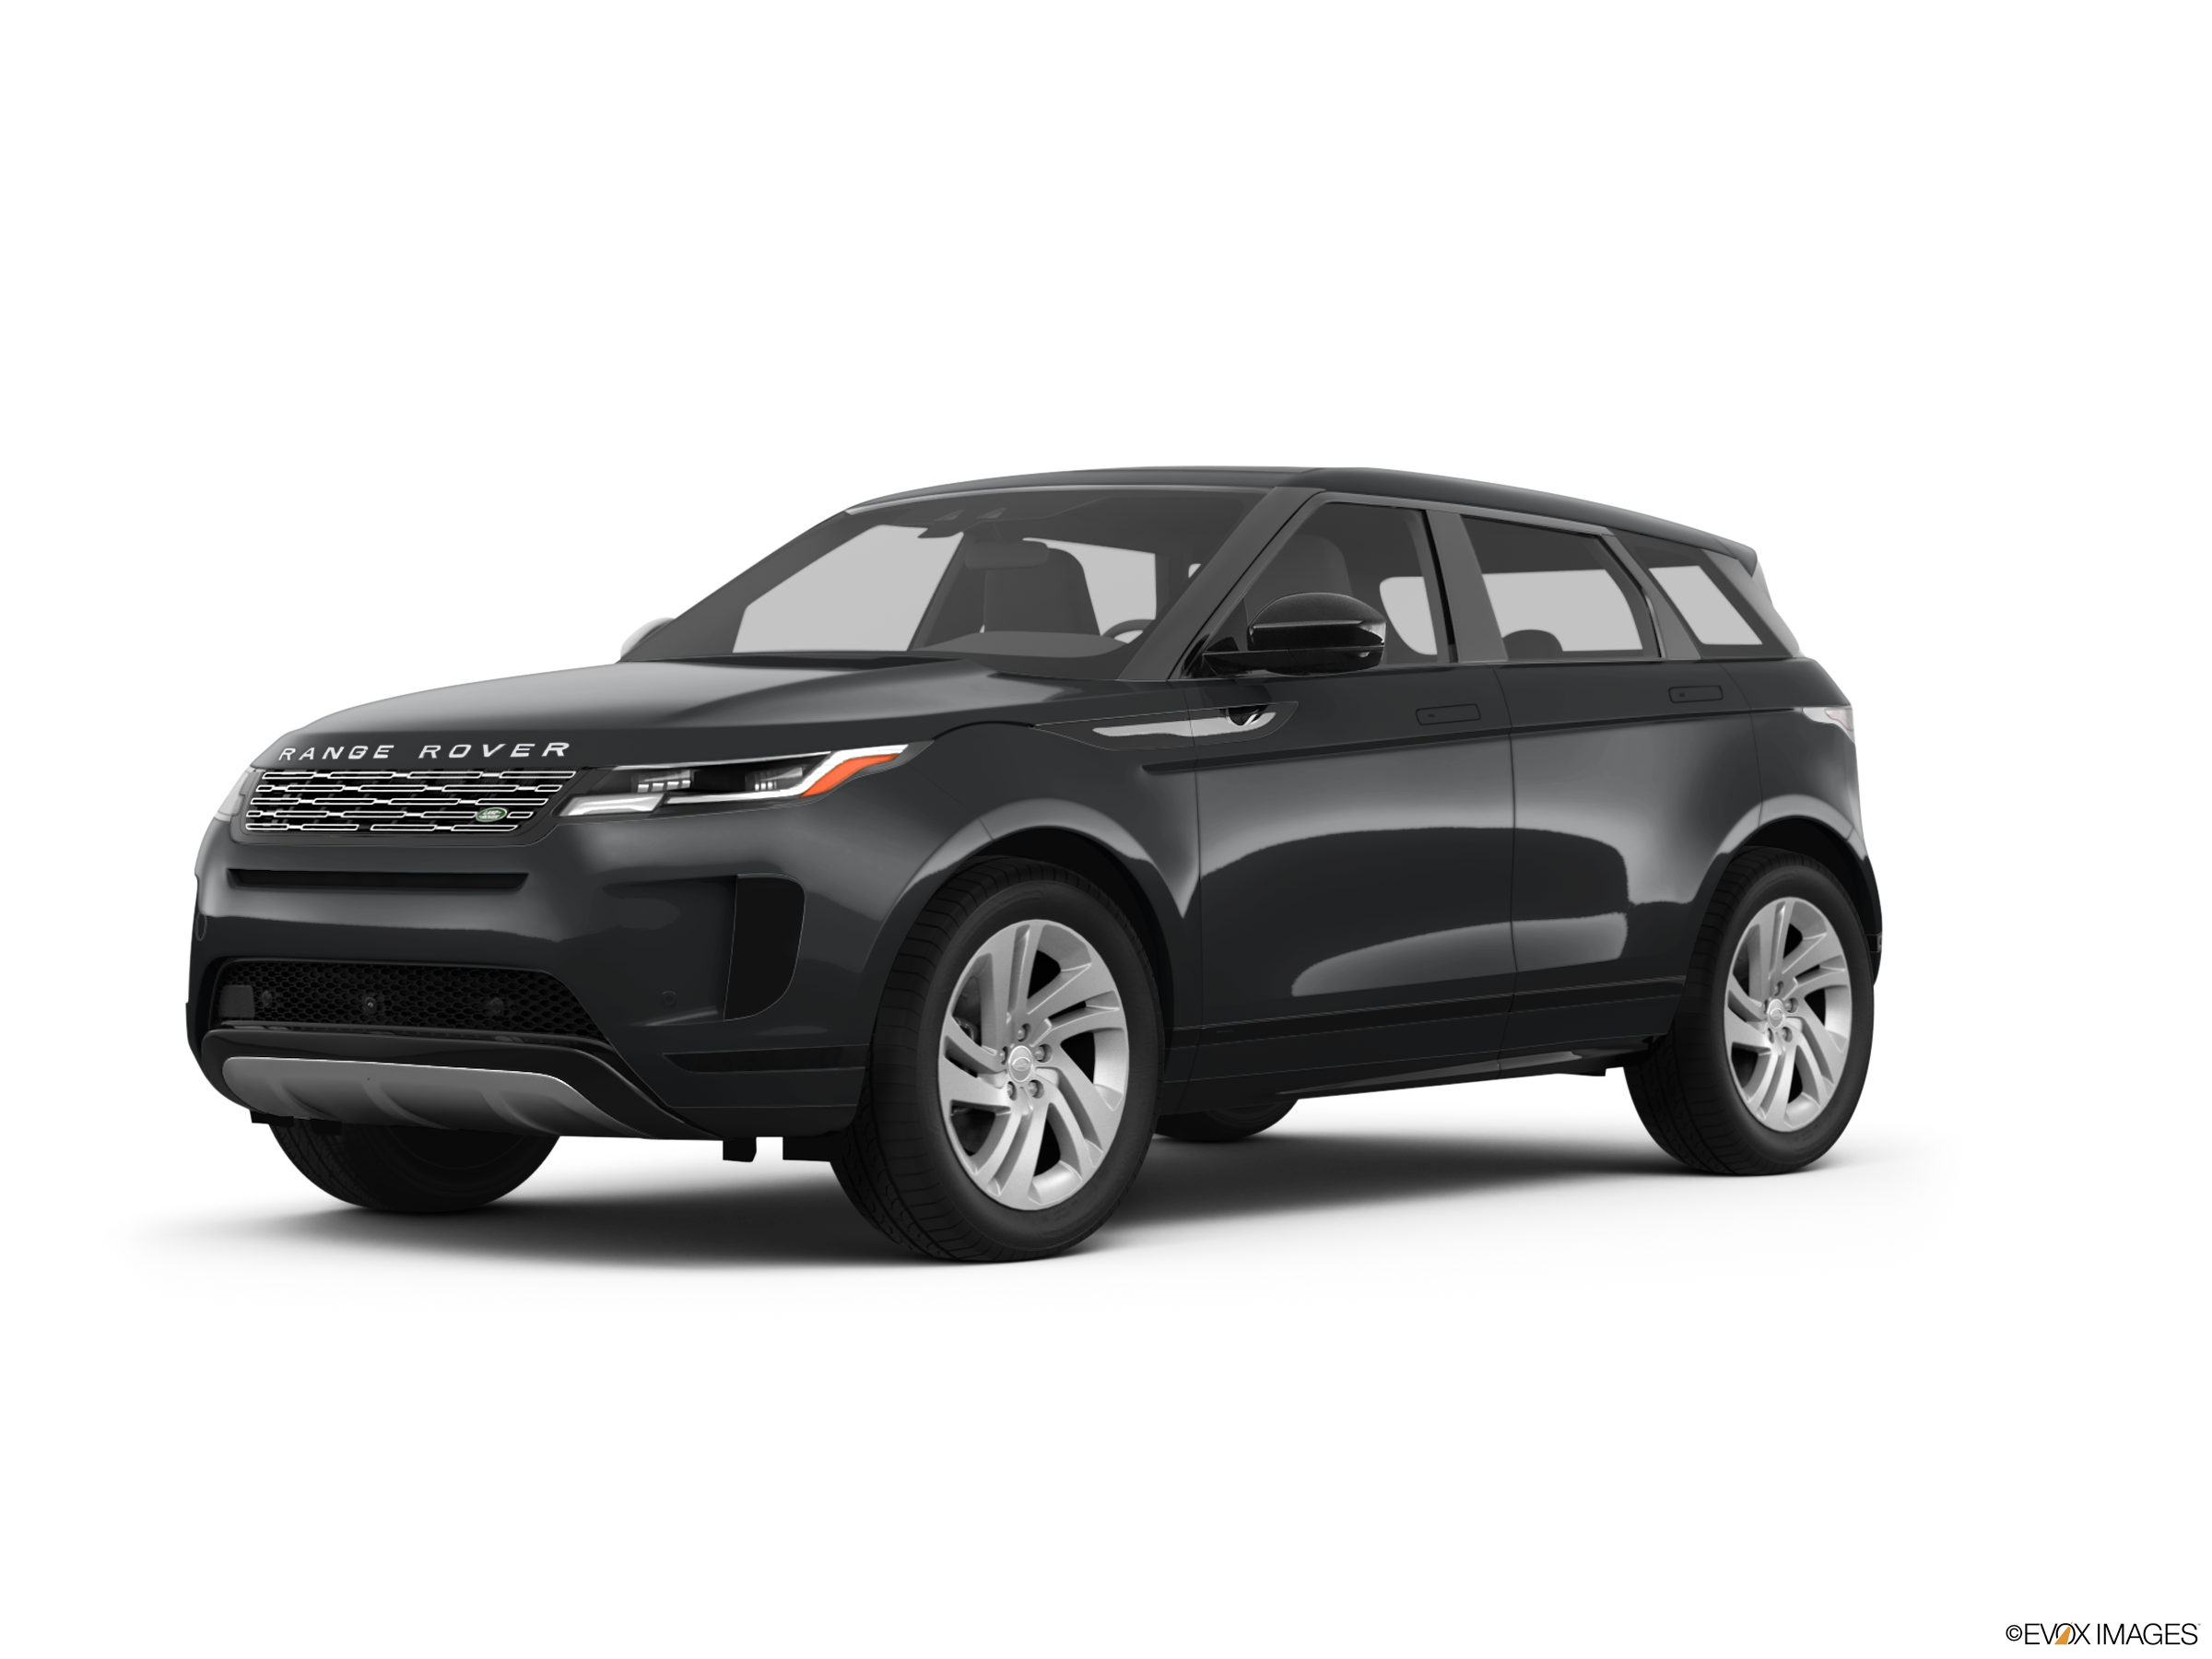 Review: Land Rover makes small updates to its littlest Range Rover, the  always stylish Evoque - The Globe and Mail